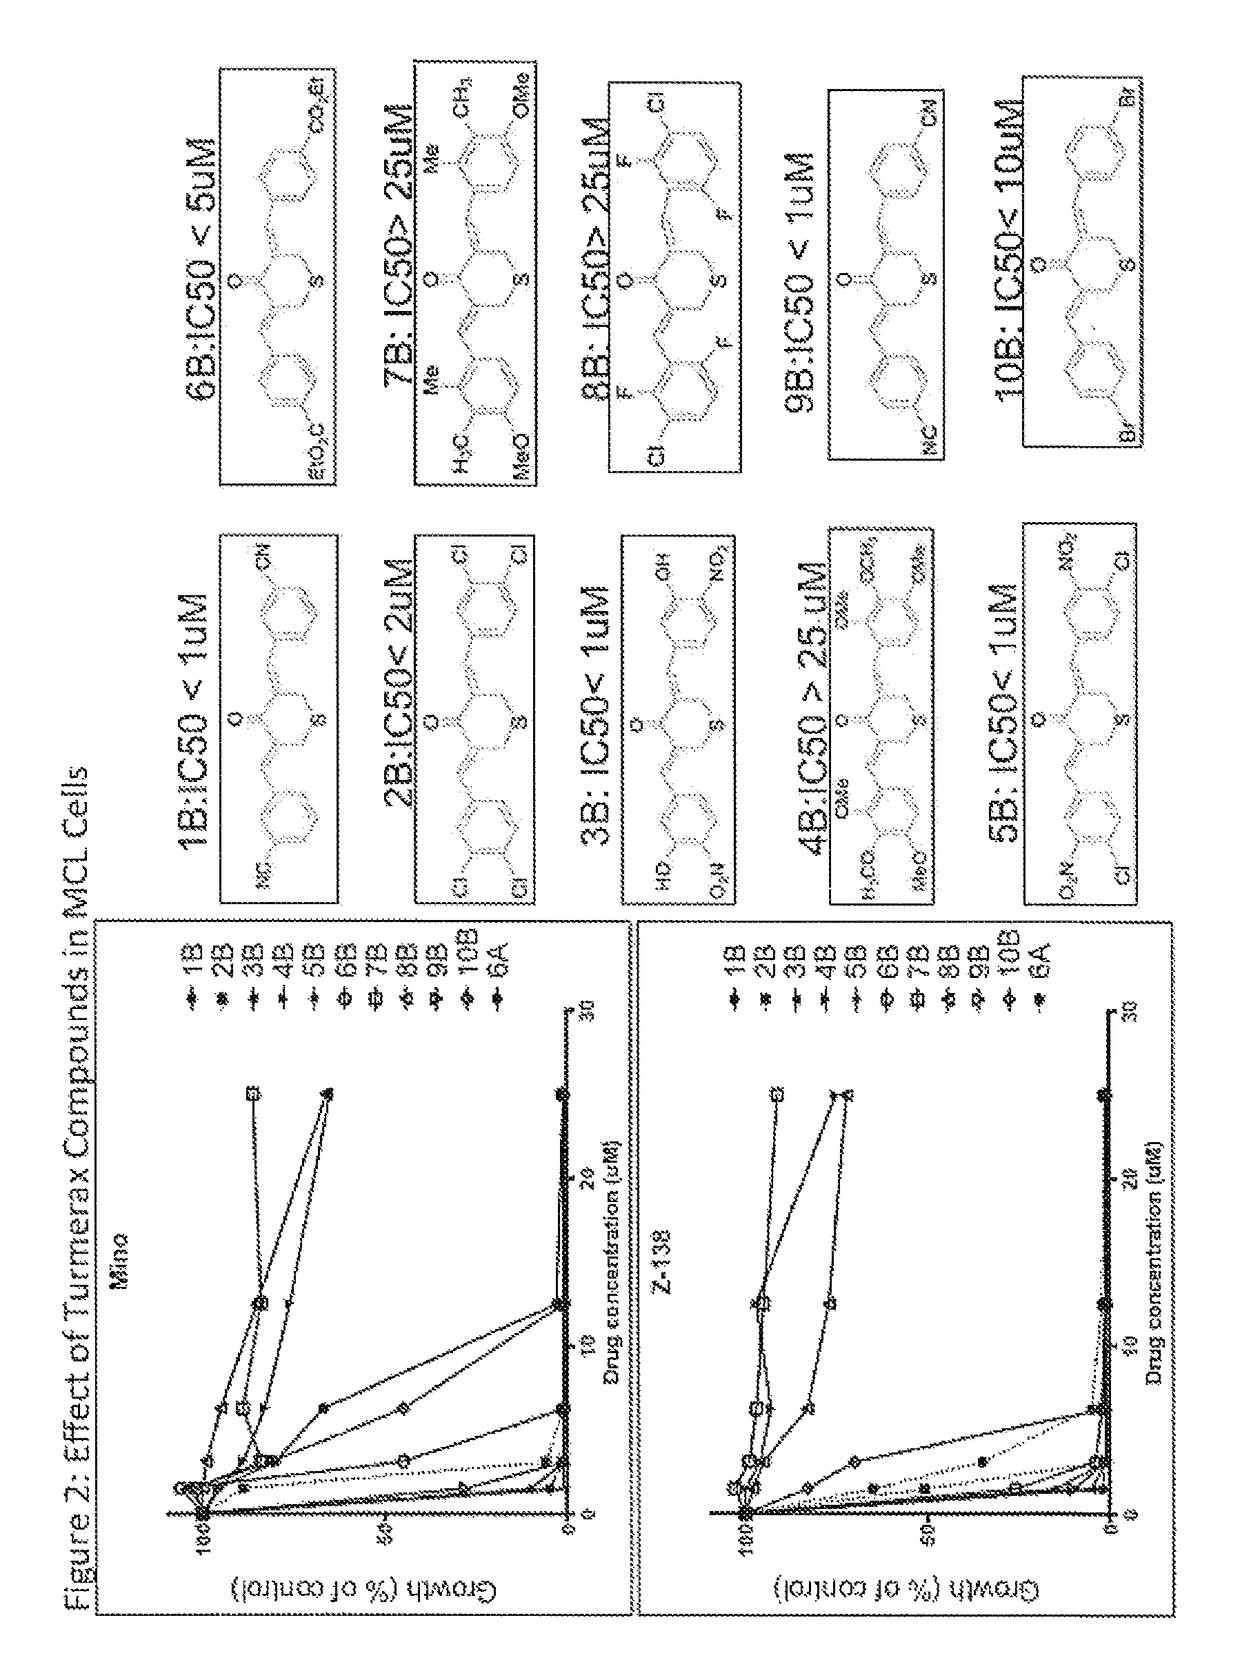 Compounds for treating inflammatory and hyperproliferative diseases